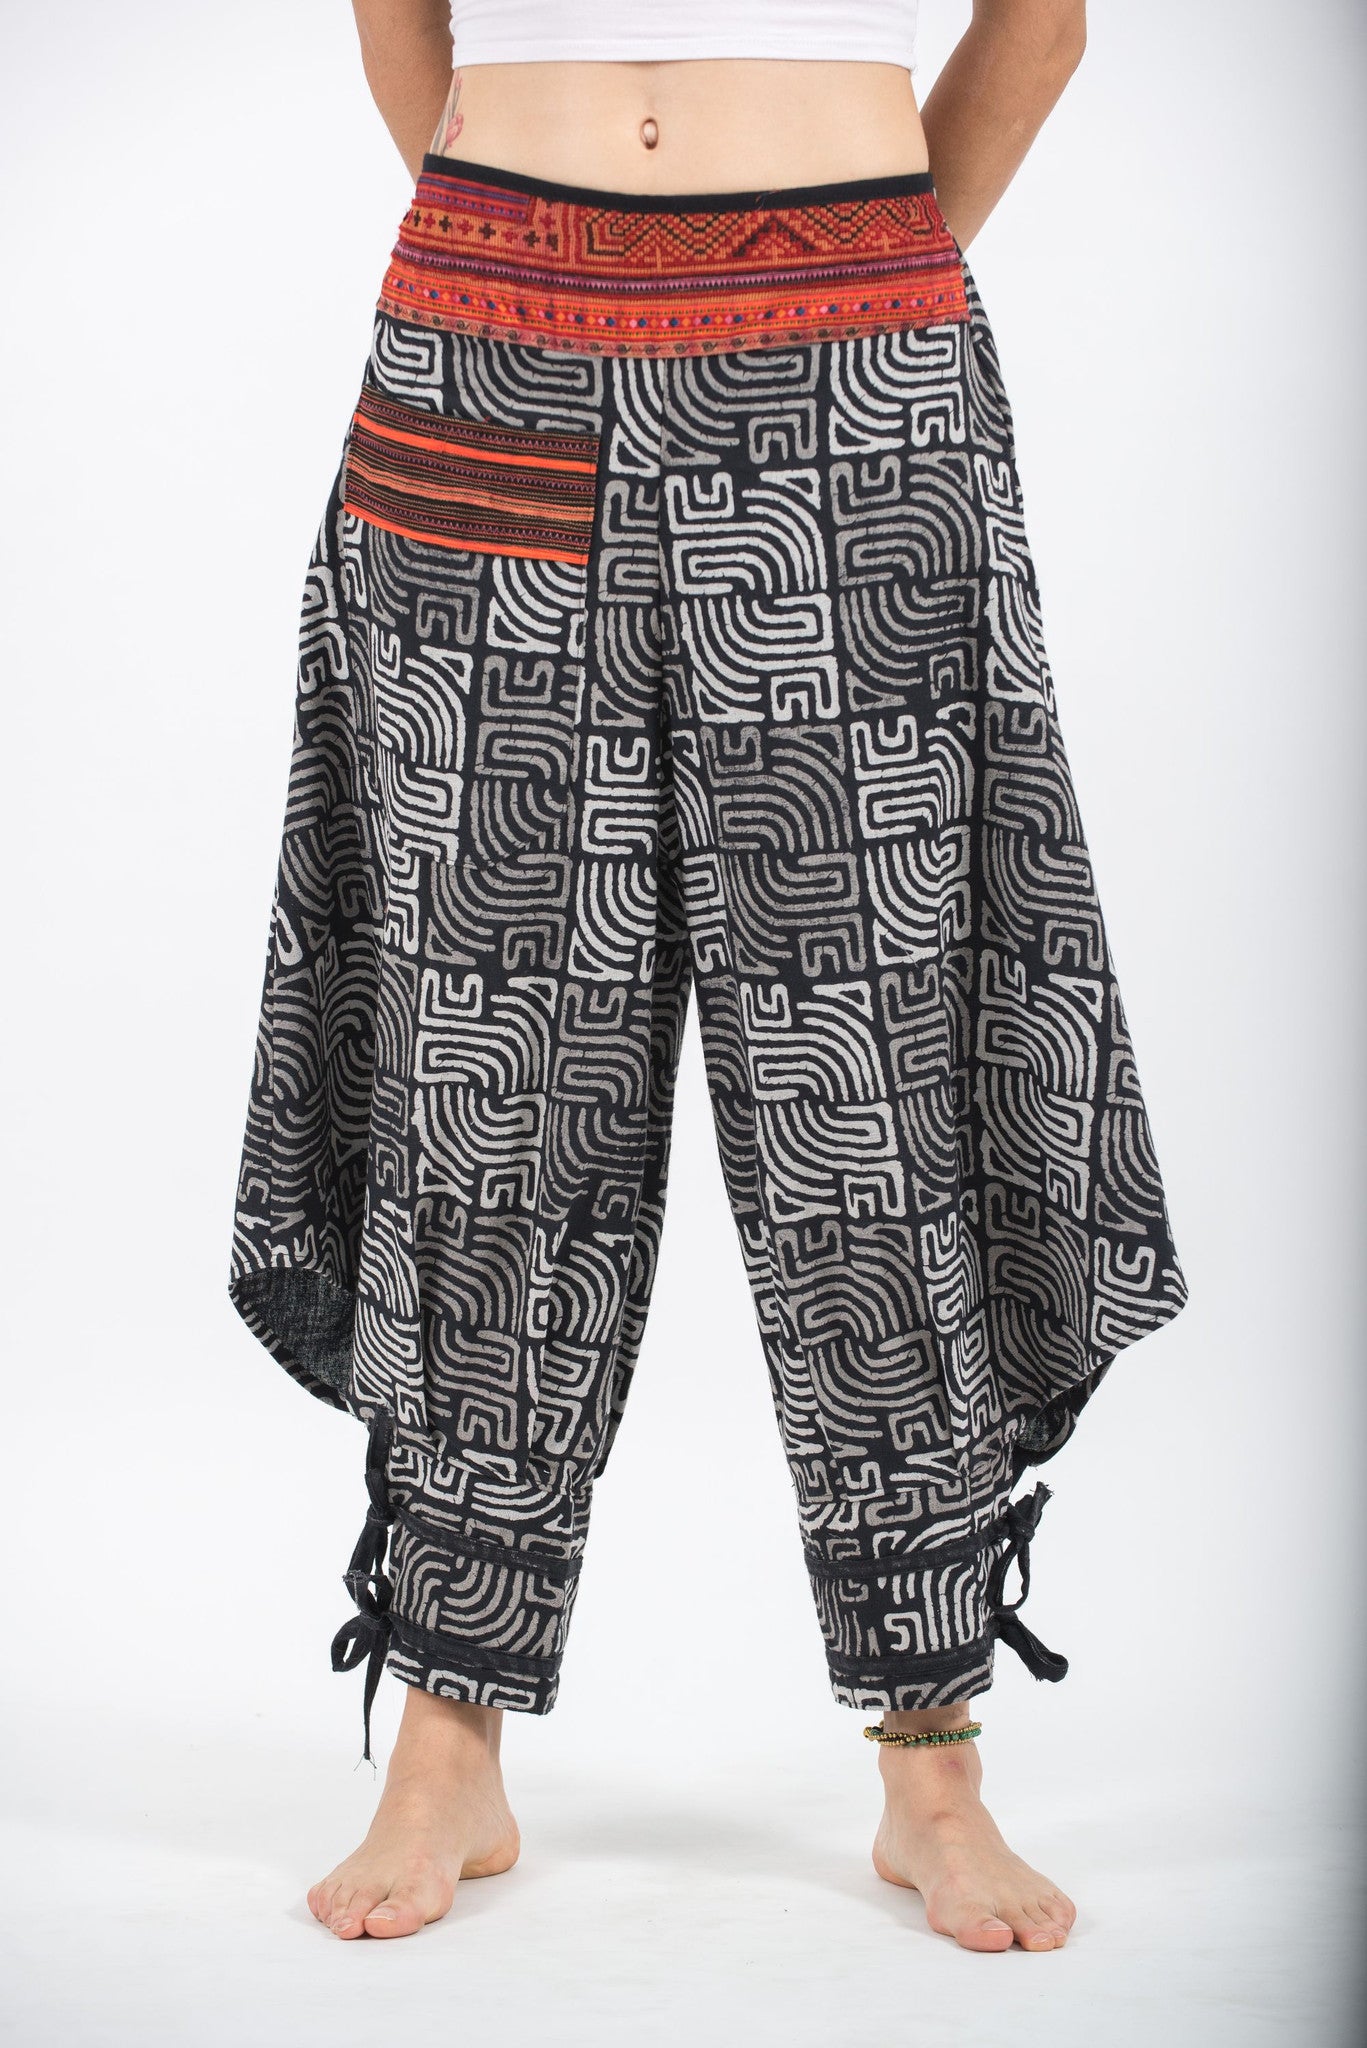 Woven Prints Thai Hill Tribe Fabric Men's Harem Pants with Ankle Strap